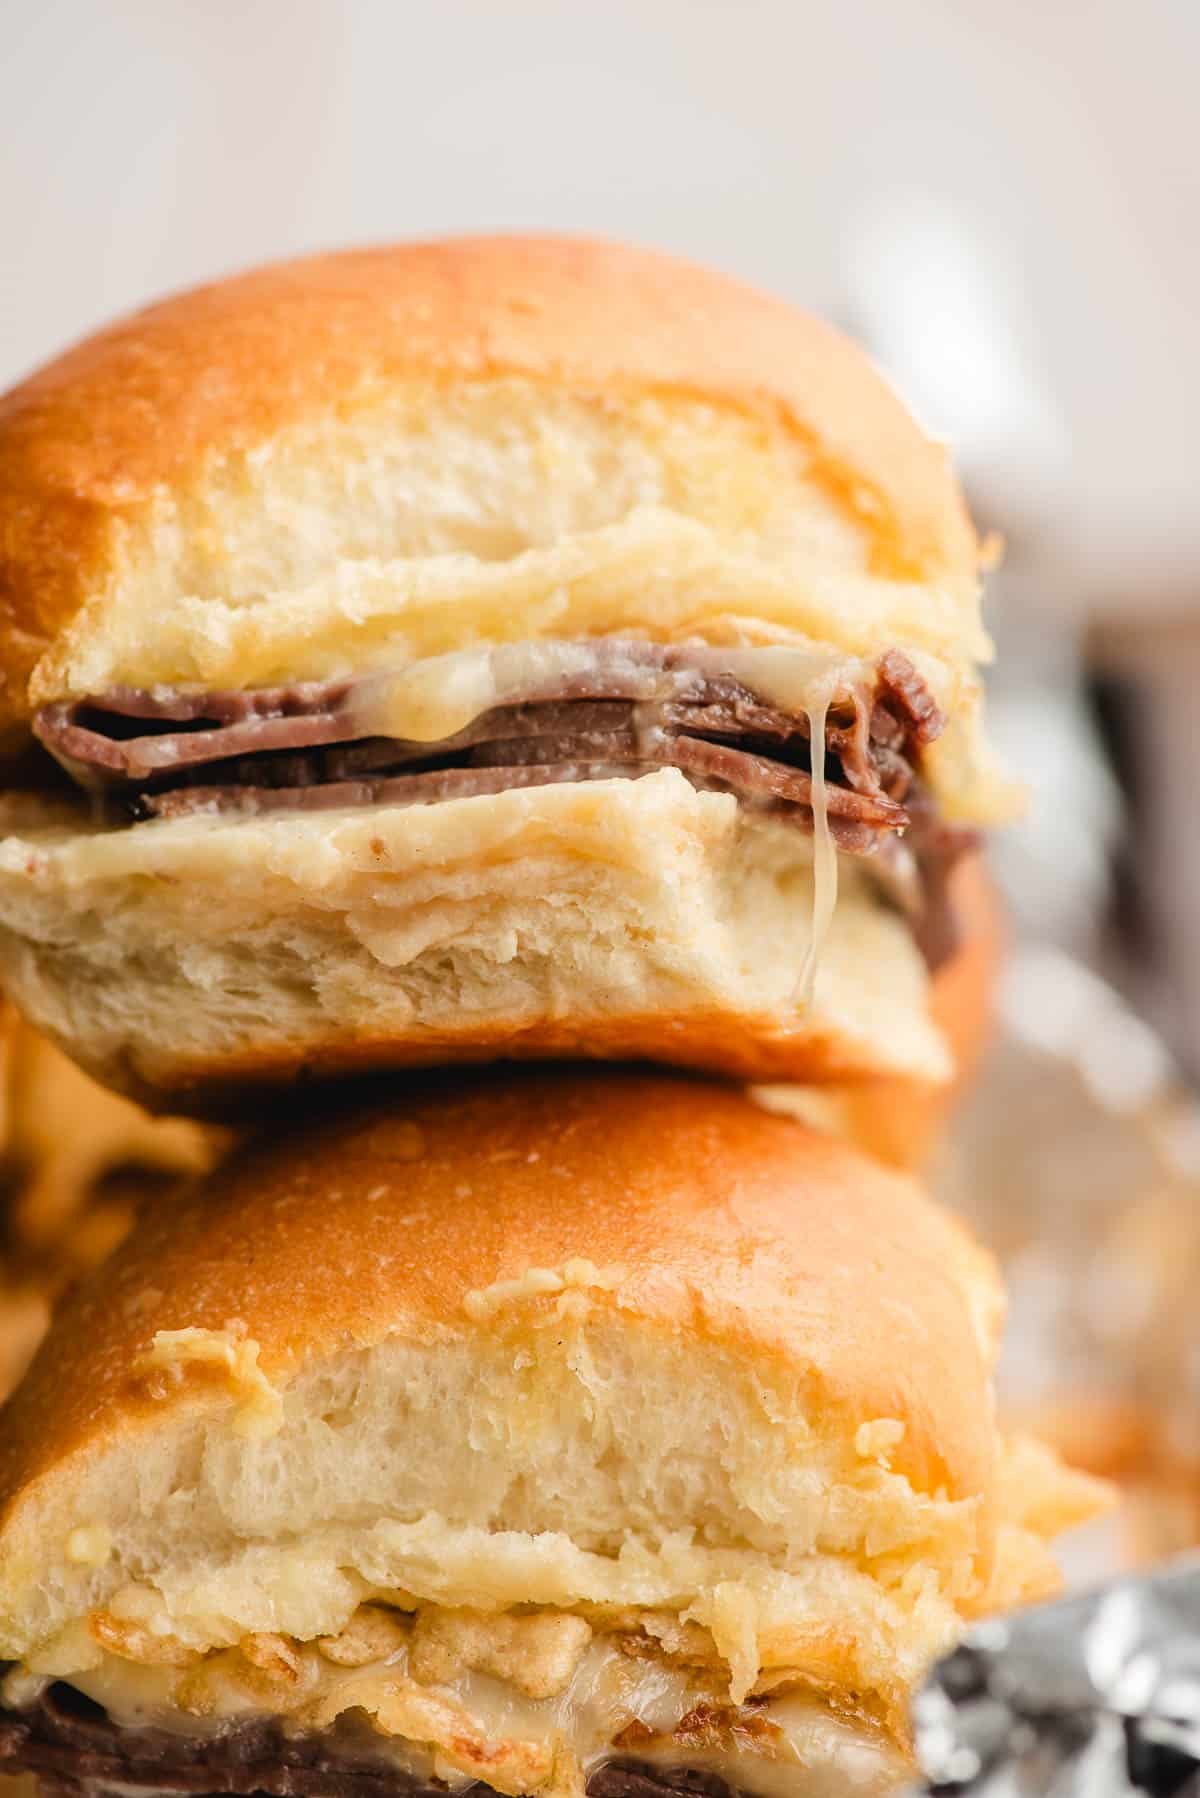 Slider with roast beef, melty white cheddar, horseradish sauce, and french fried onions.